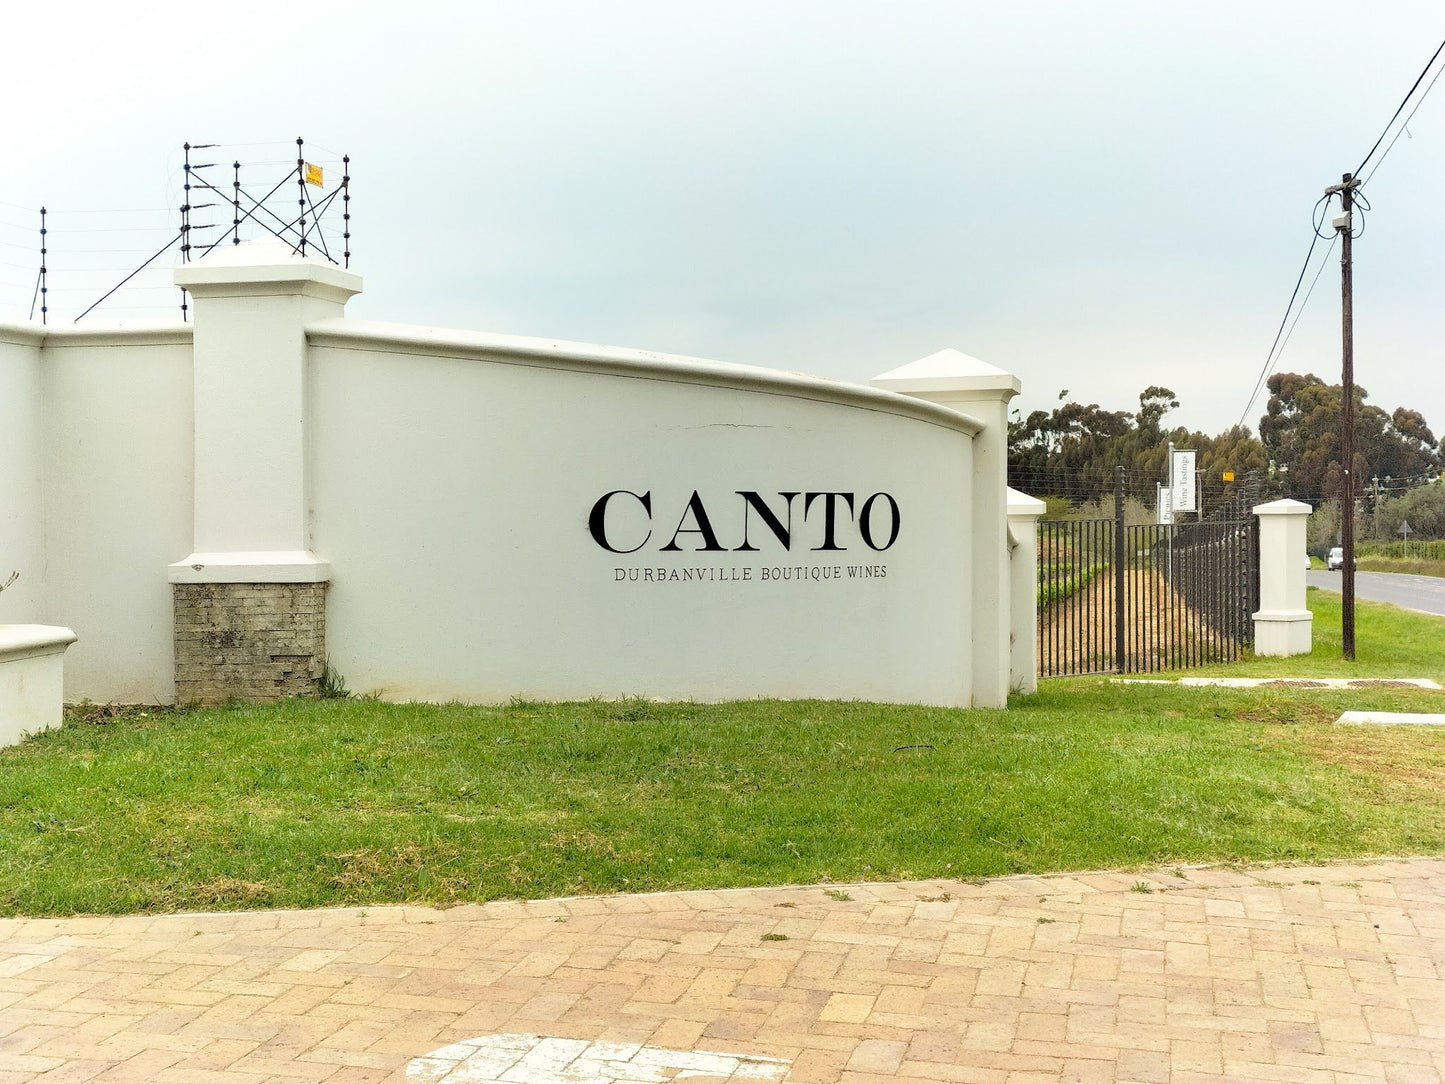  Canto Boutique Wines